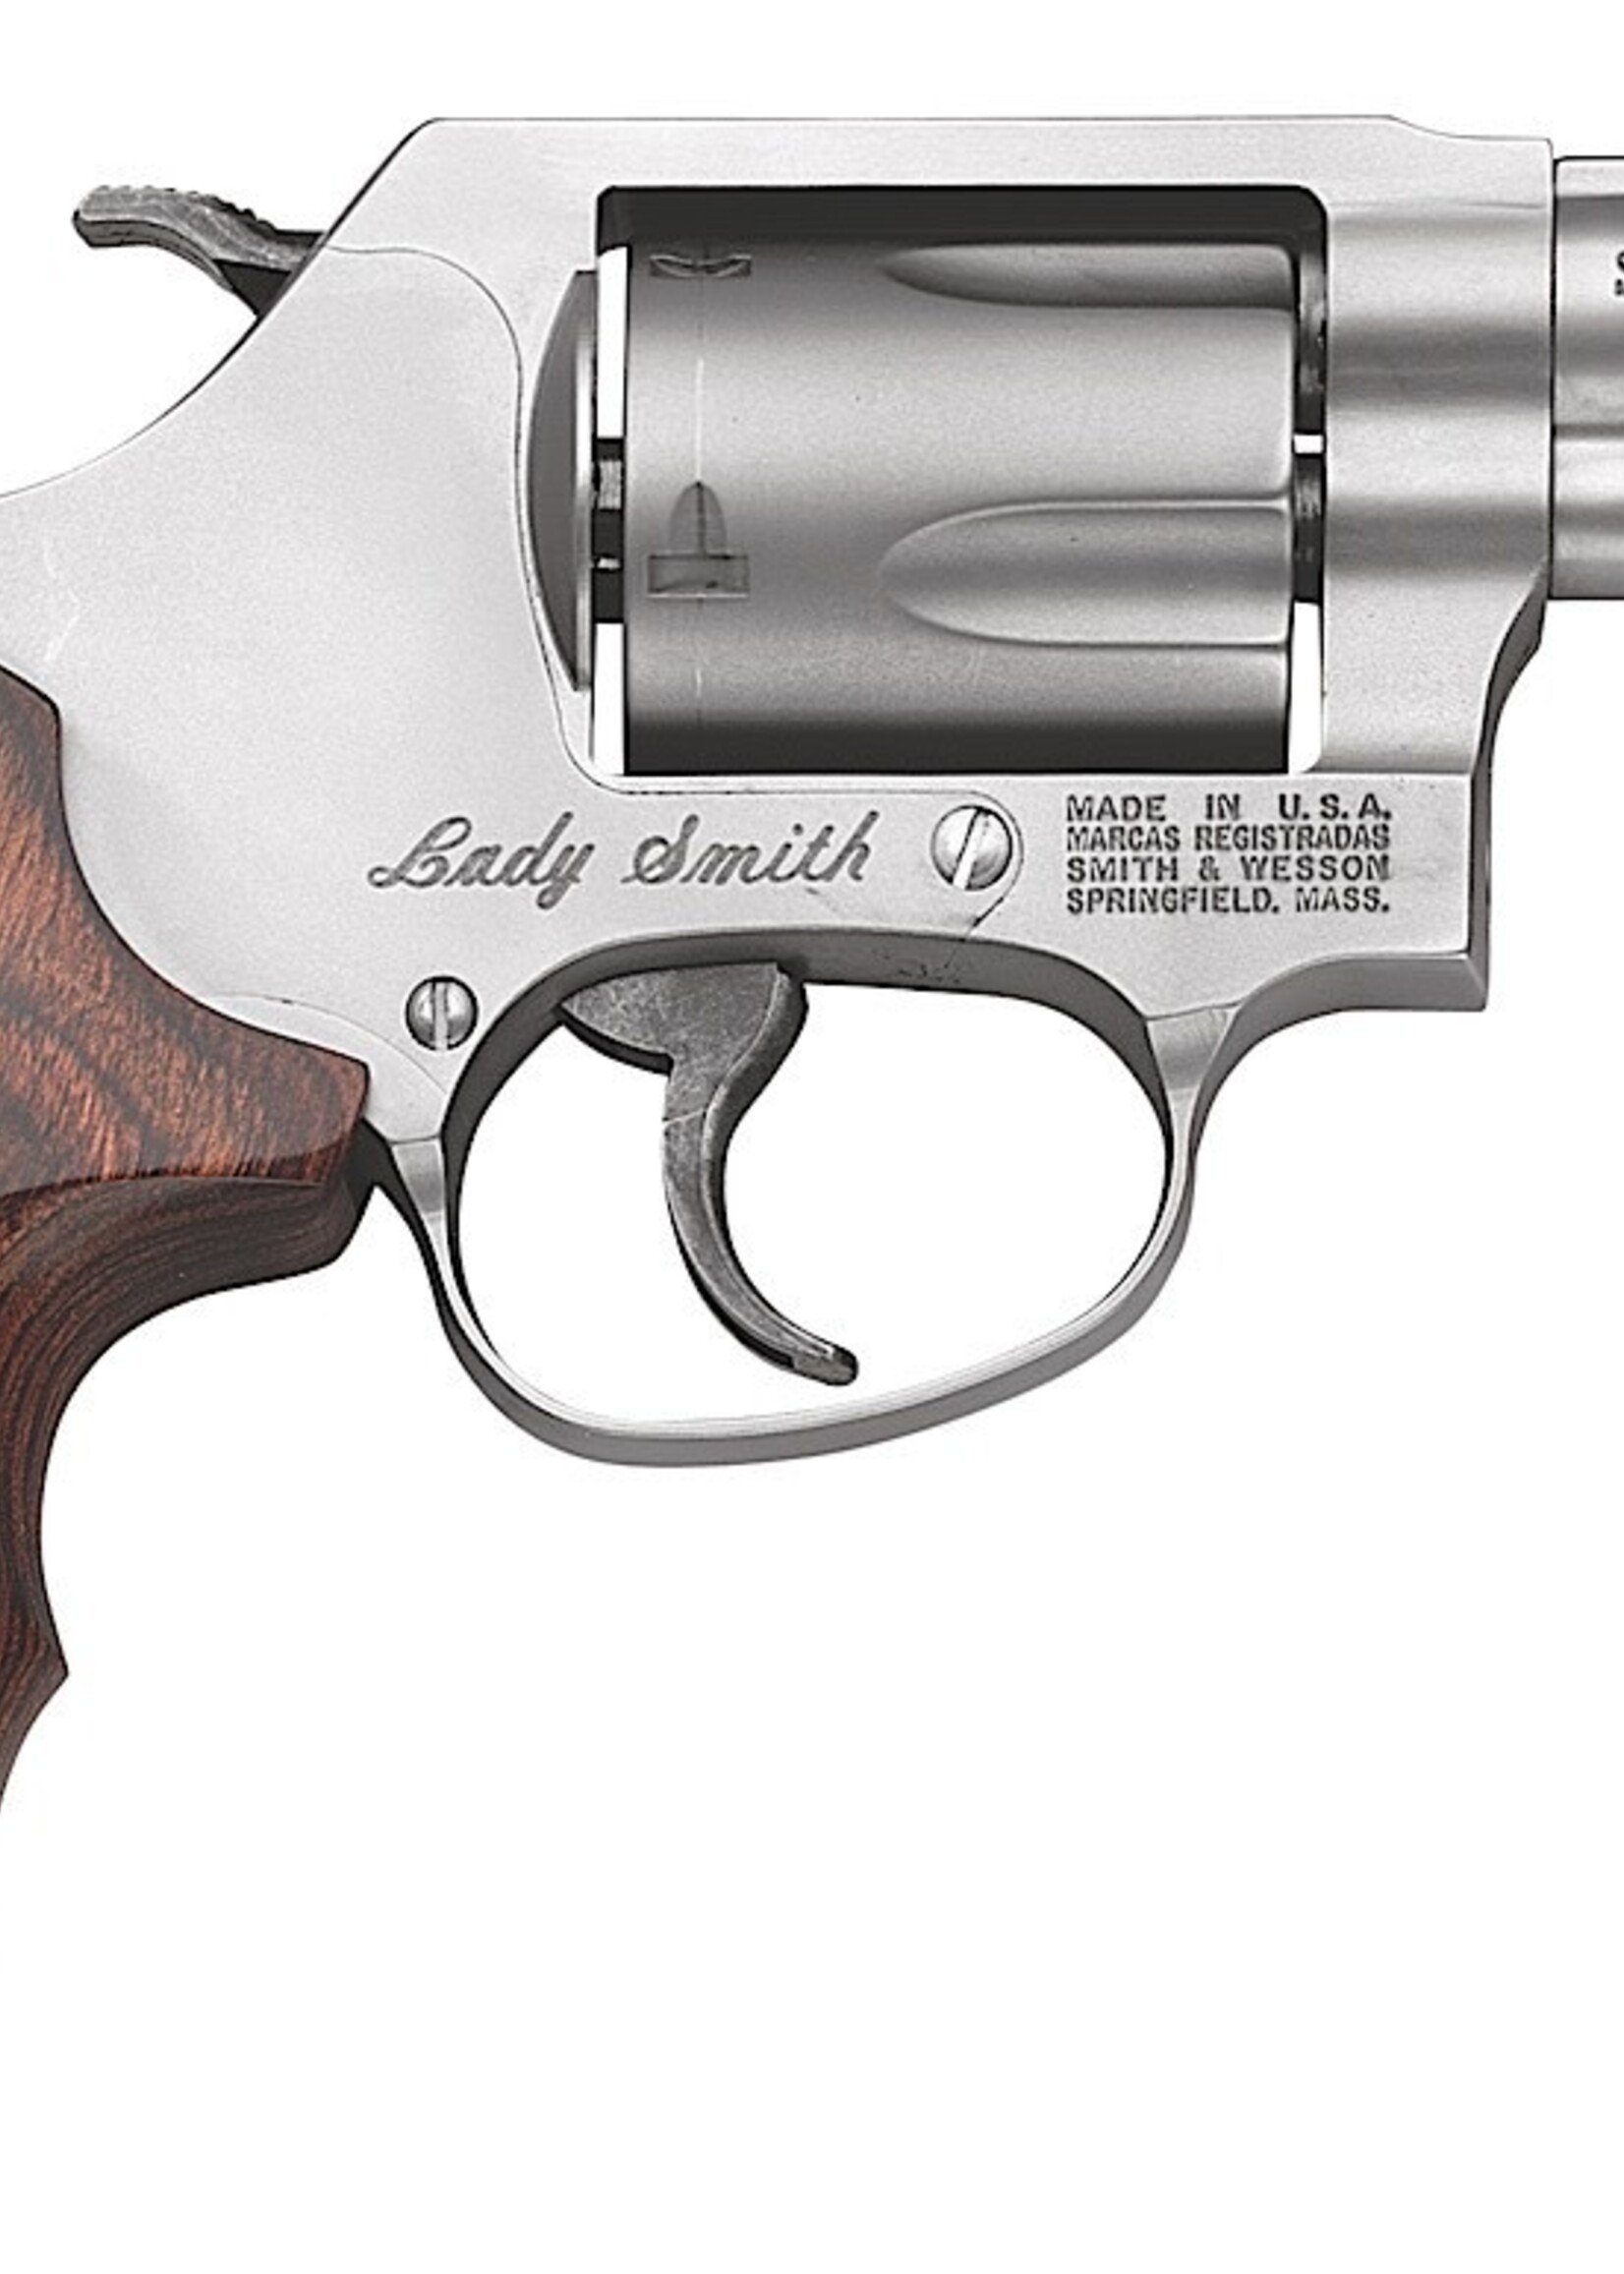 Smith & Wesson Smith & Wesson 162414 Model 60 Ladysmith 357 Mag or 38 S&W Spl +P Stainless Steel 2.12" Barrel & 5rd Cylinder, Satin Stainless Steel J-Frame, Ergonomic Wood Grip For Smaller Hands